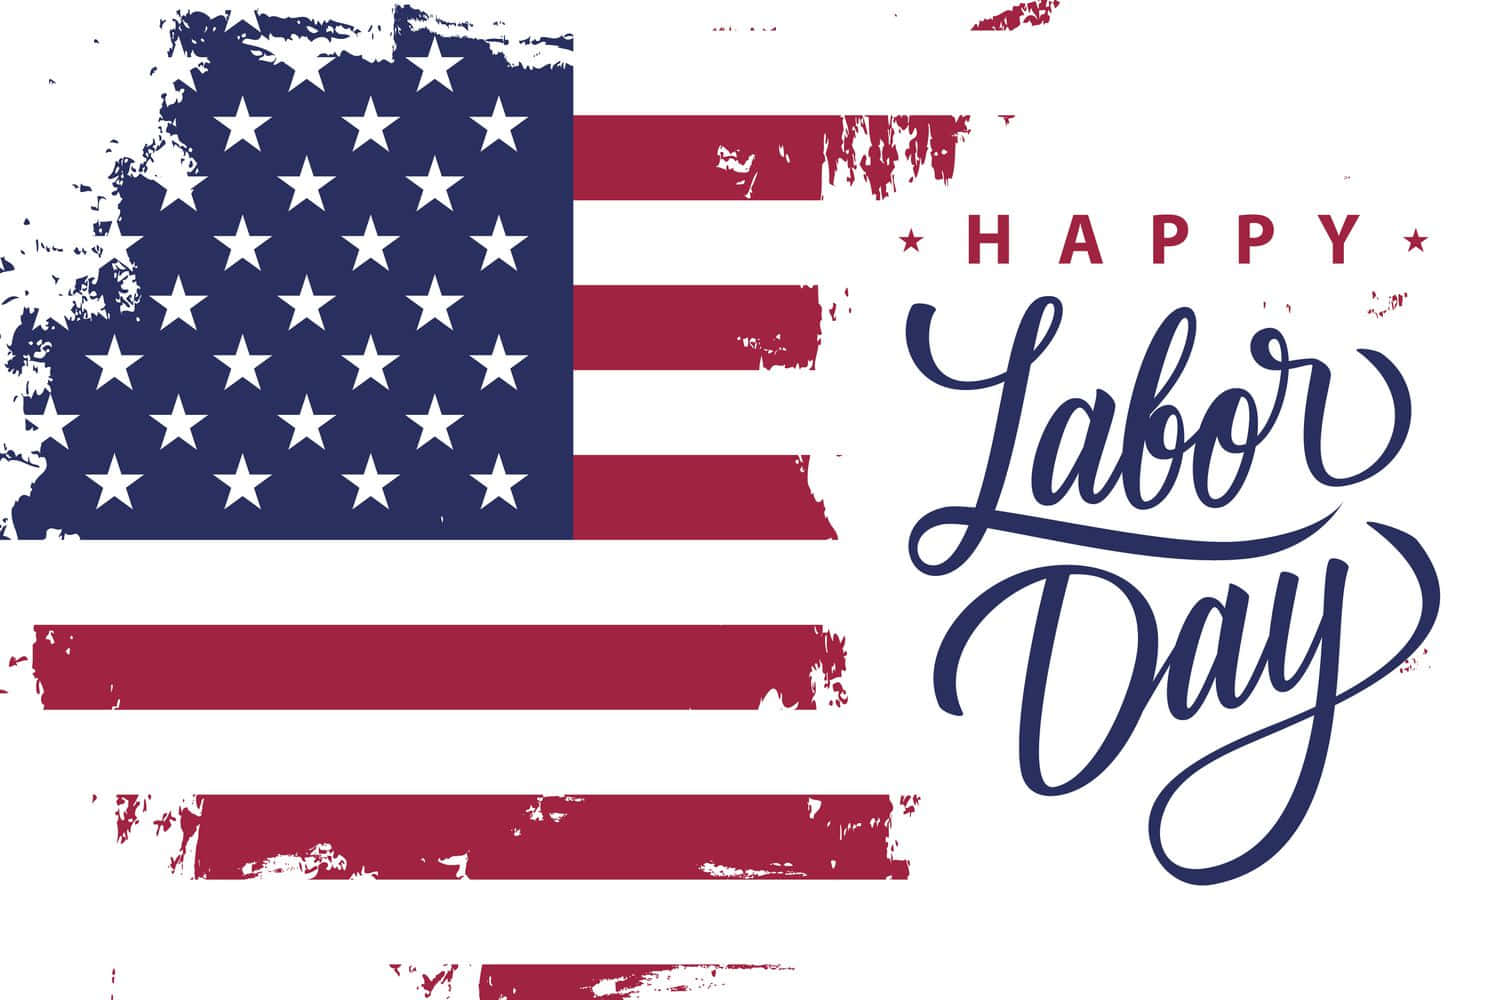 Celebrate the Hard Working Men and Women this Labor Day